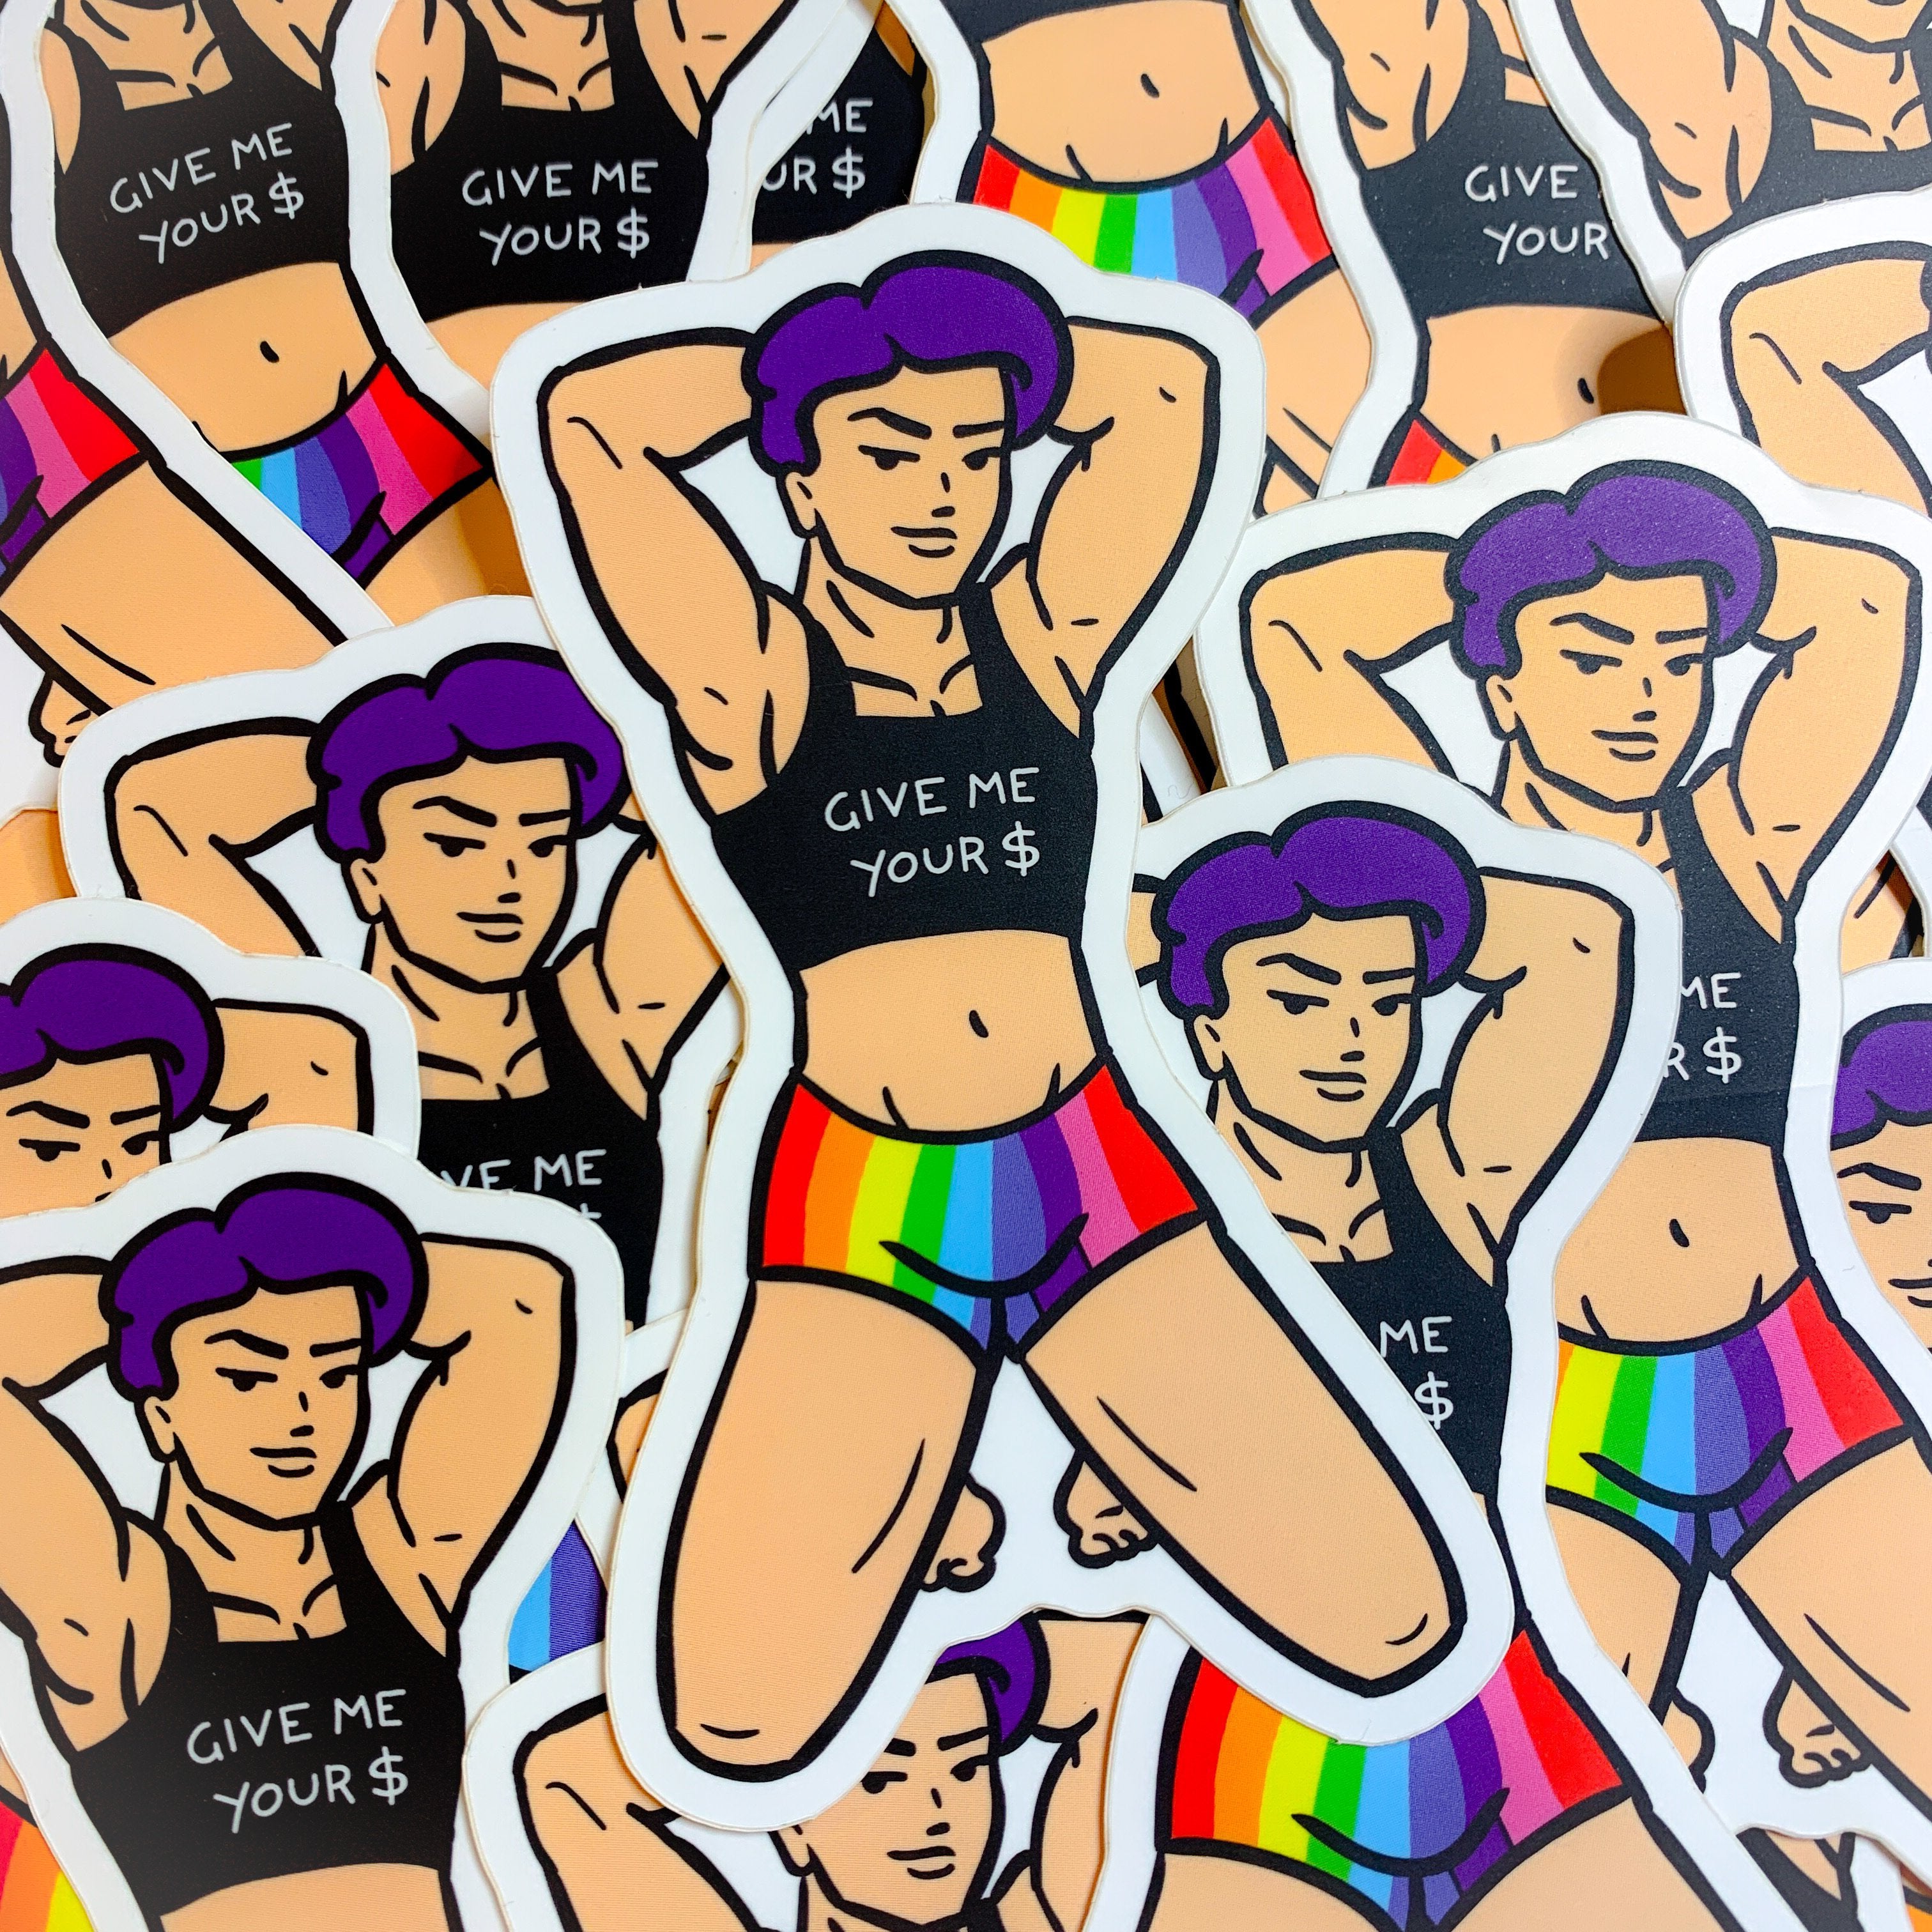 Payton stickers laid out together on a table. Payton is a muscular masculine person, with rainbow shorts and a black midriff tank that says "GIVE ME YOUR $". He is posed confidently on his knees, with his hands behind his purple hair, and a slight smile.